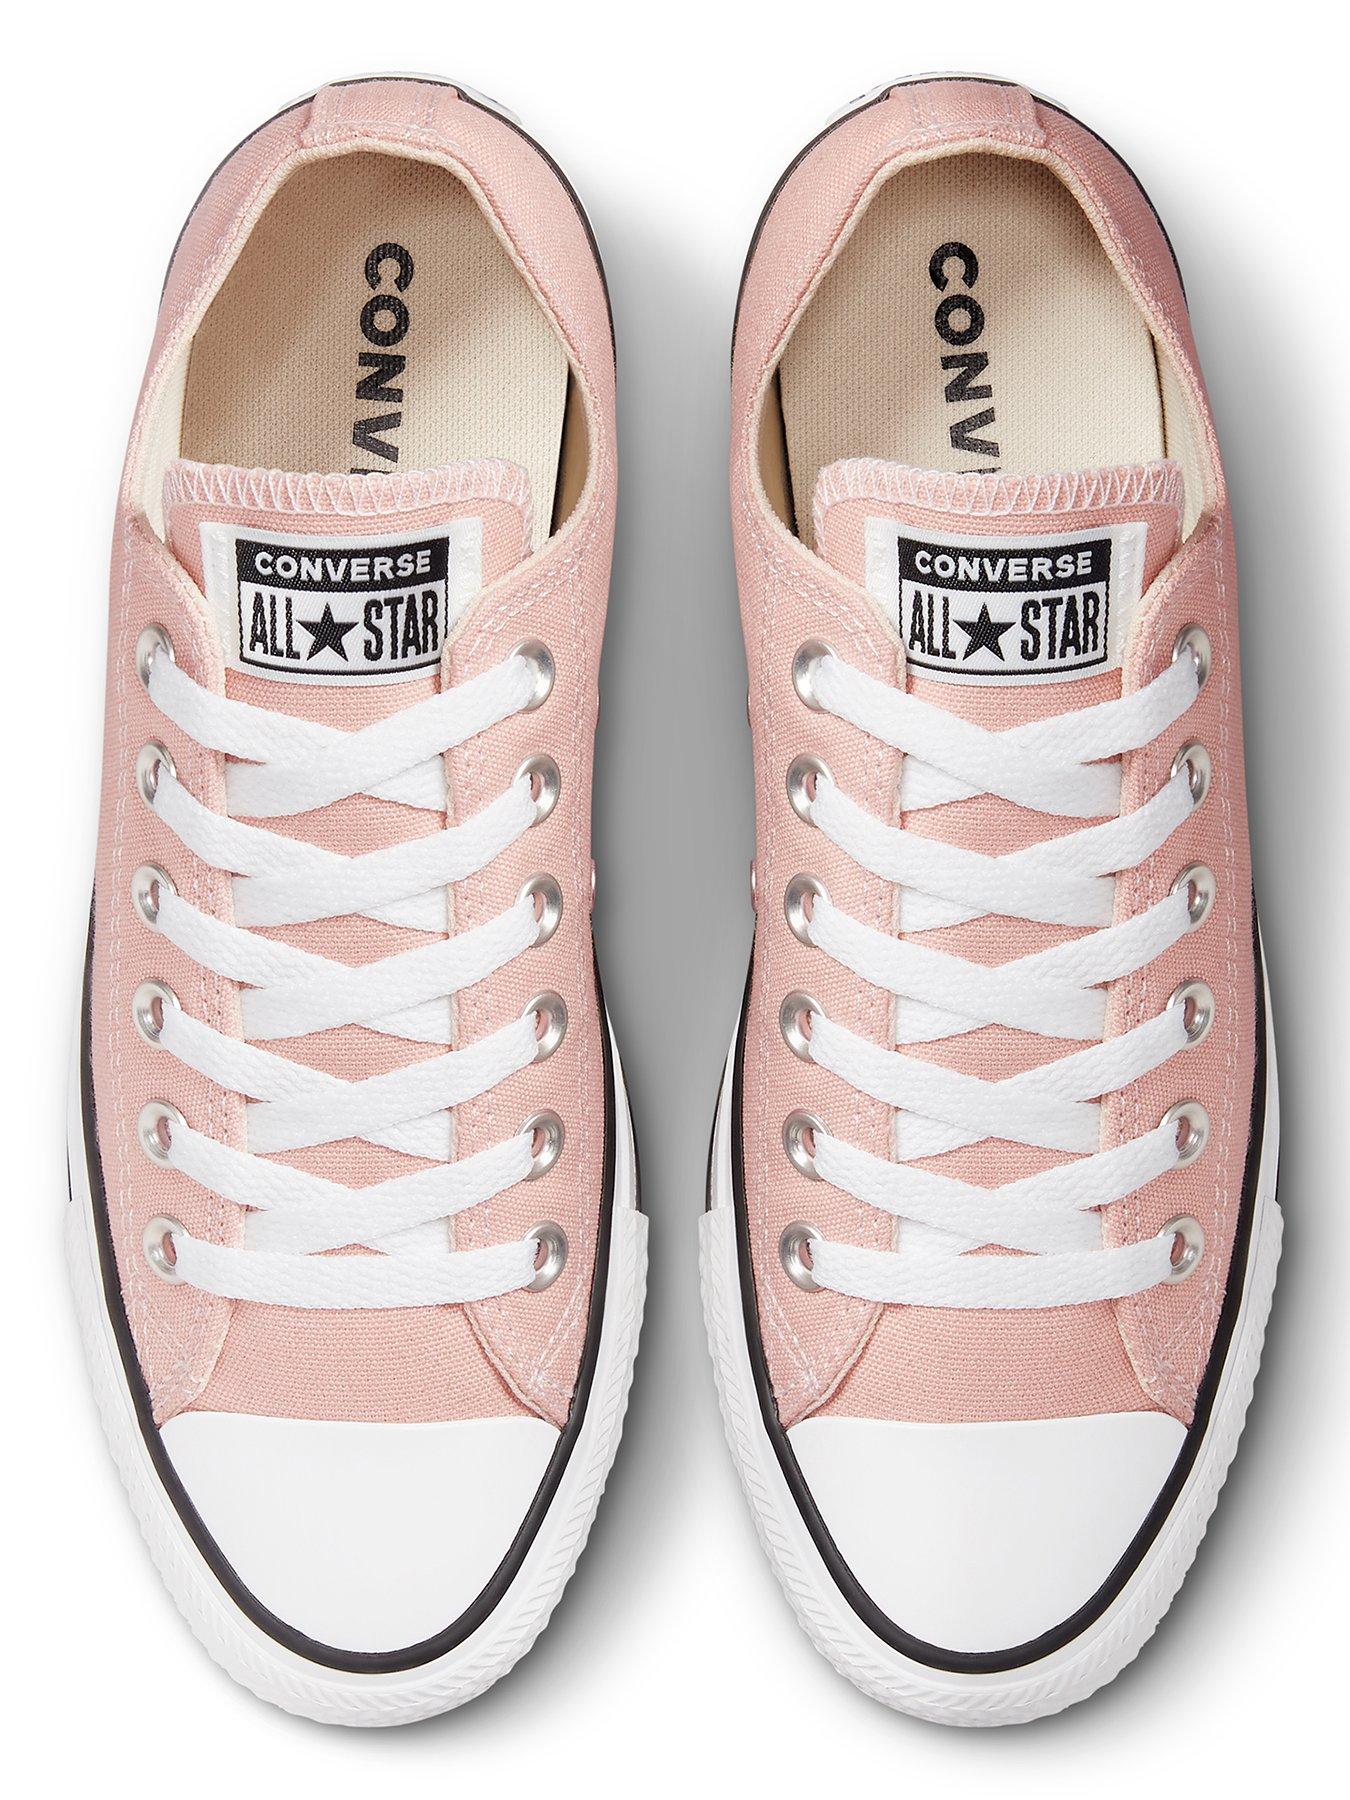  Chuck Taylor All Star 50/50 Recycled Cotton Ox Plimsoll - Pink